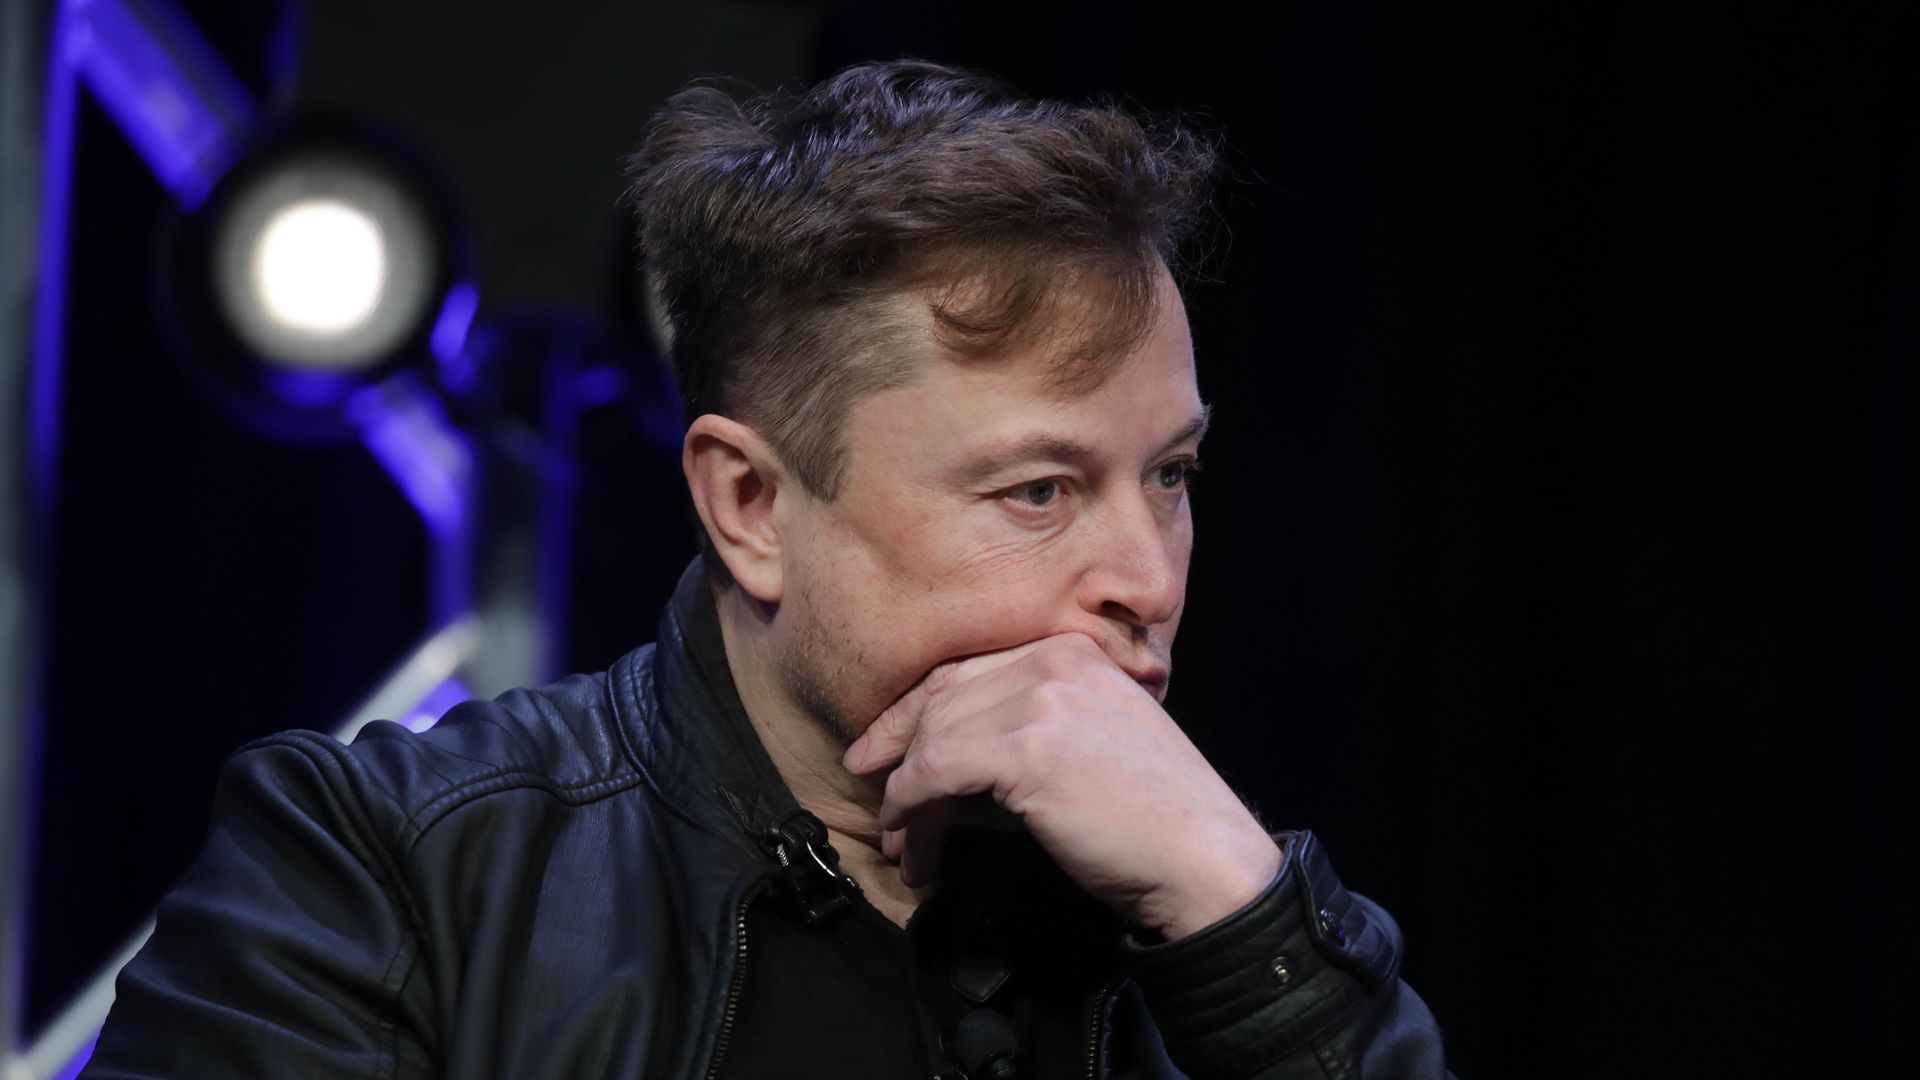 Elon Musk, Founder and Chief Engineer of SpaceX, attends the Satellite 2020 Conference in Washington, DC.